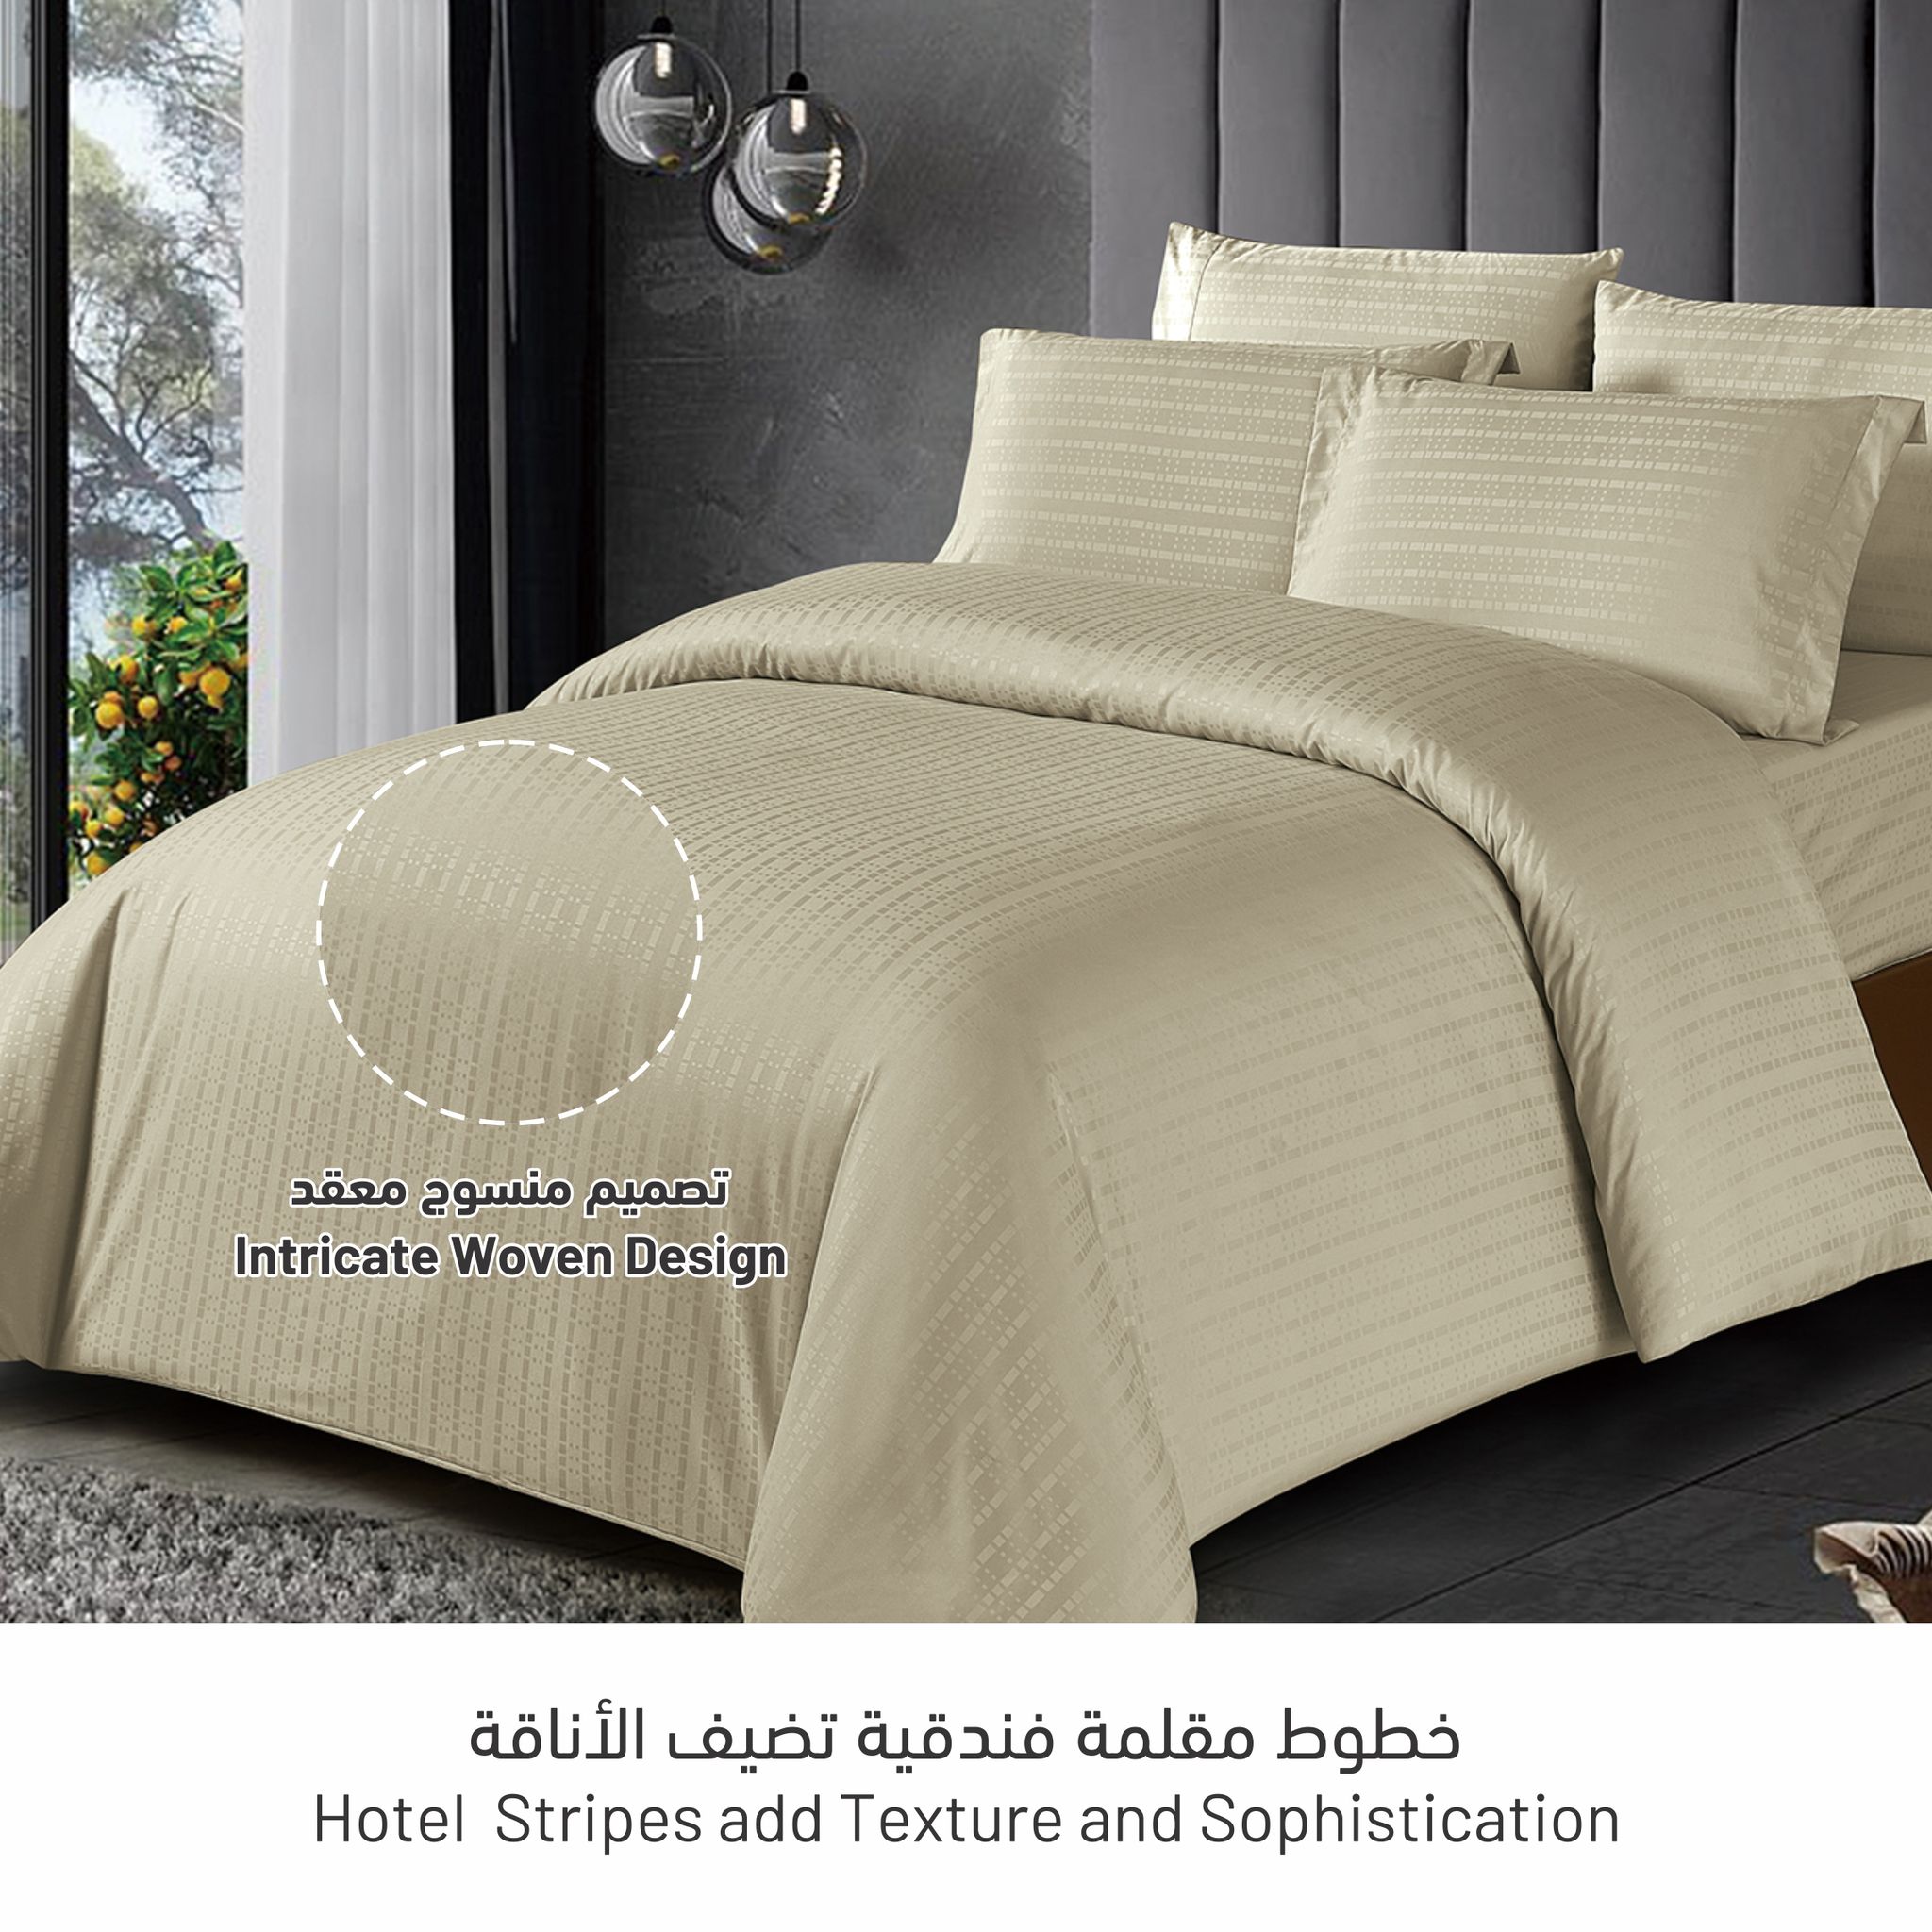 7-Piece King Size Italian Jacquard Luxurious Hotel Style Comforter , Checked Stripes with Removable Filler, Beige Colour